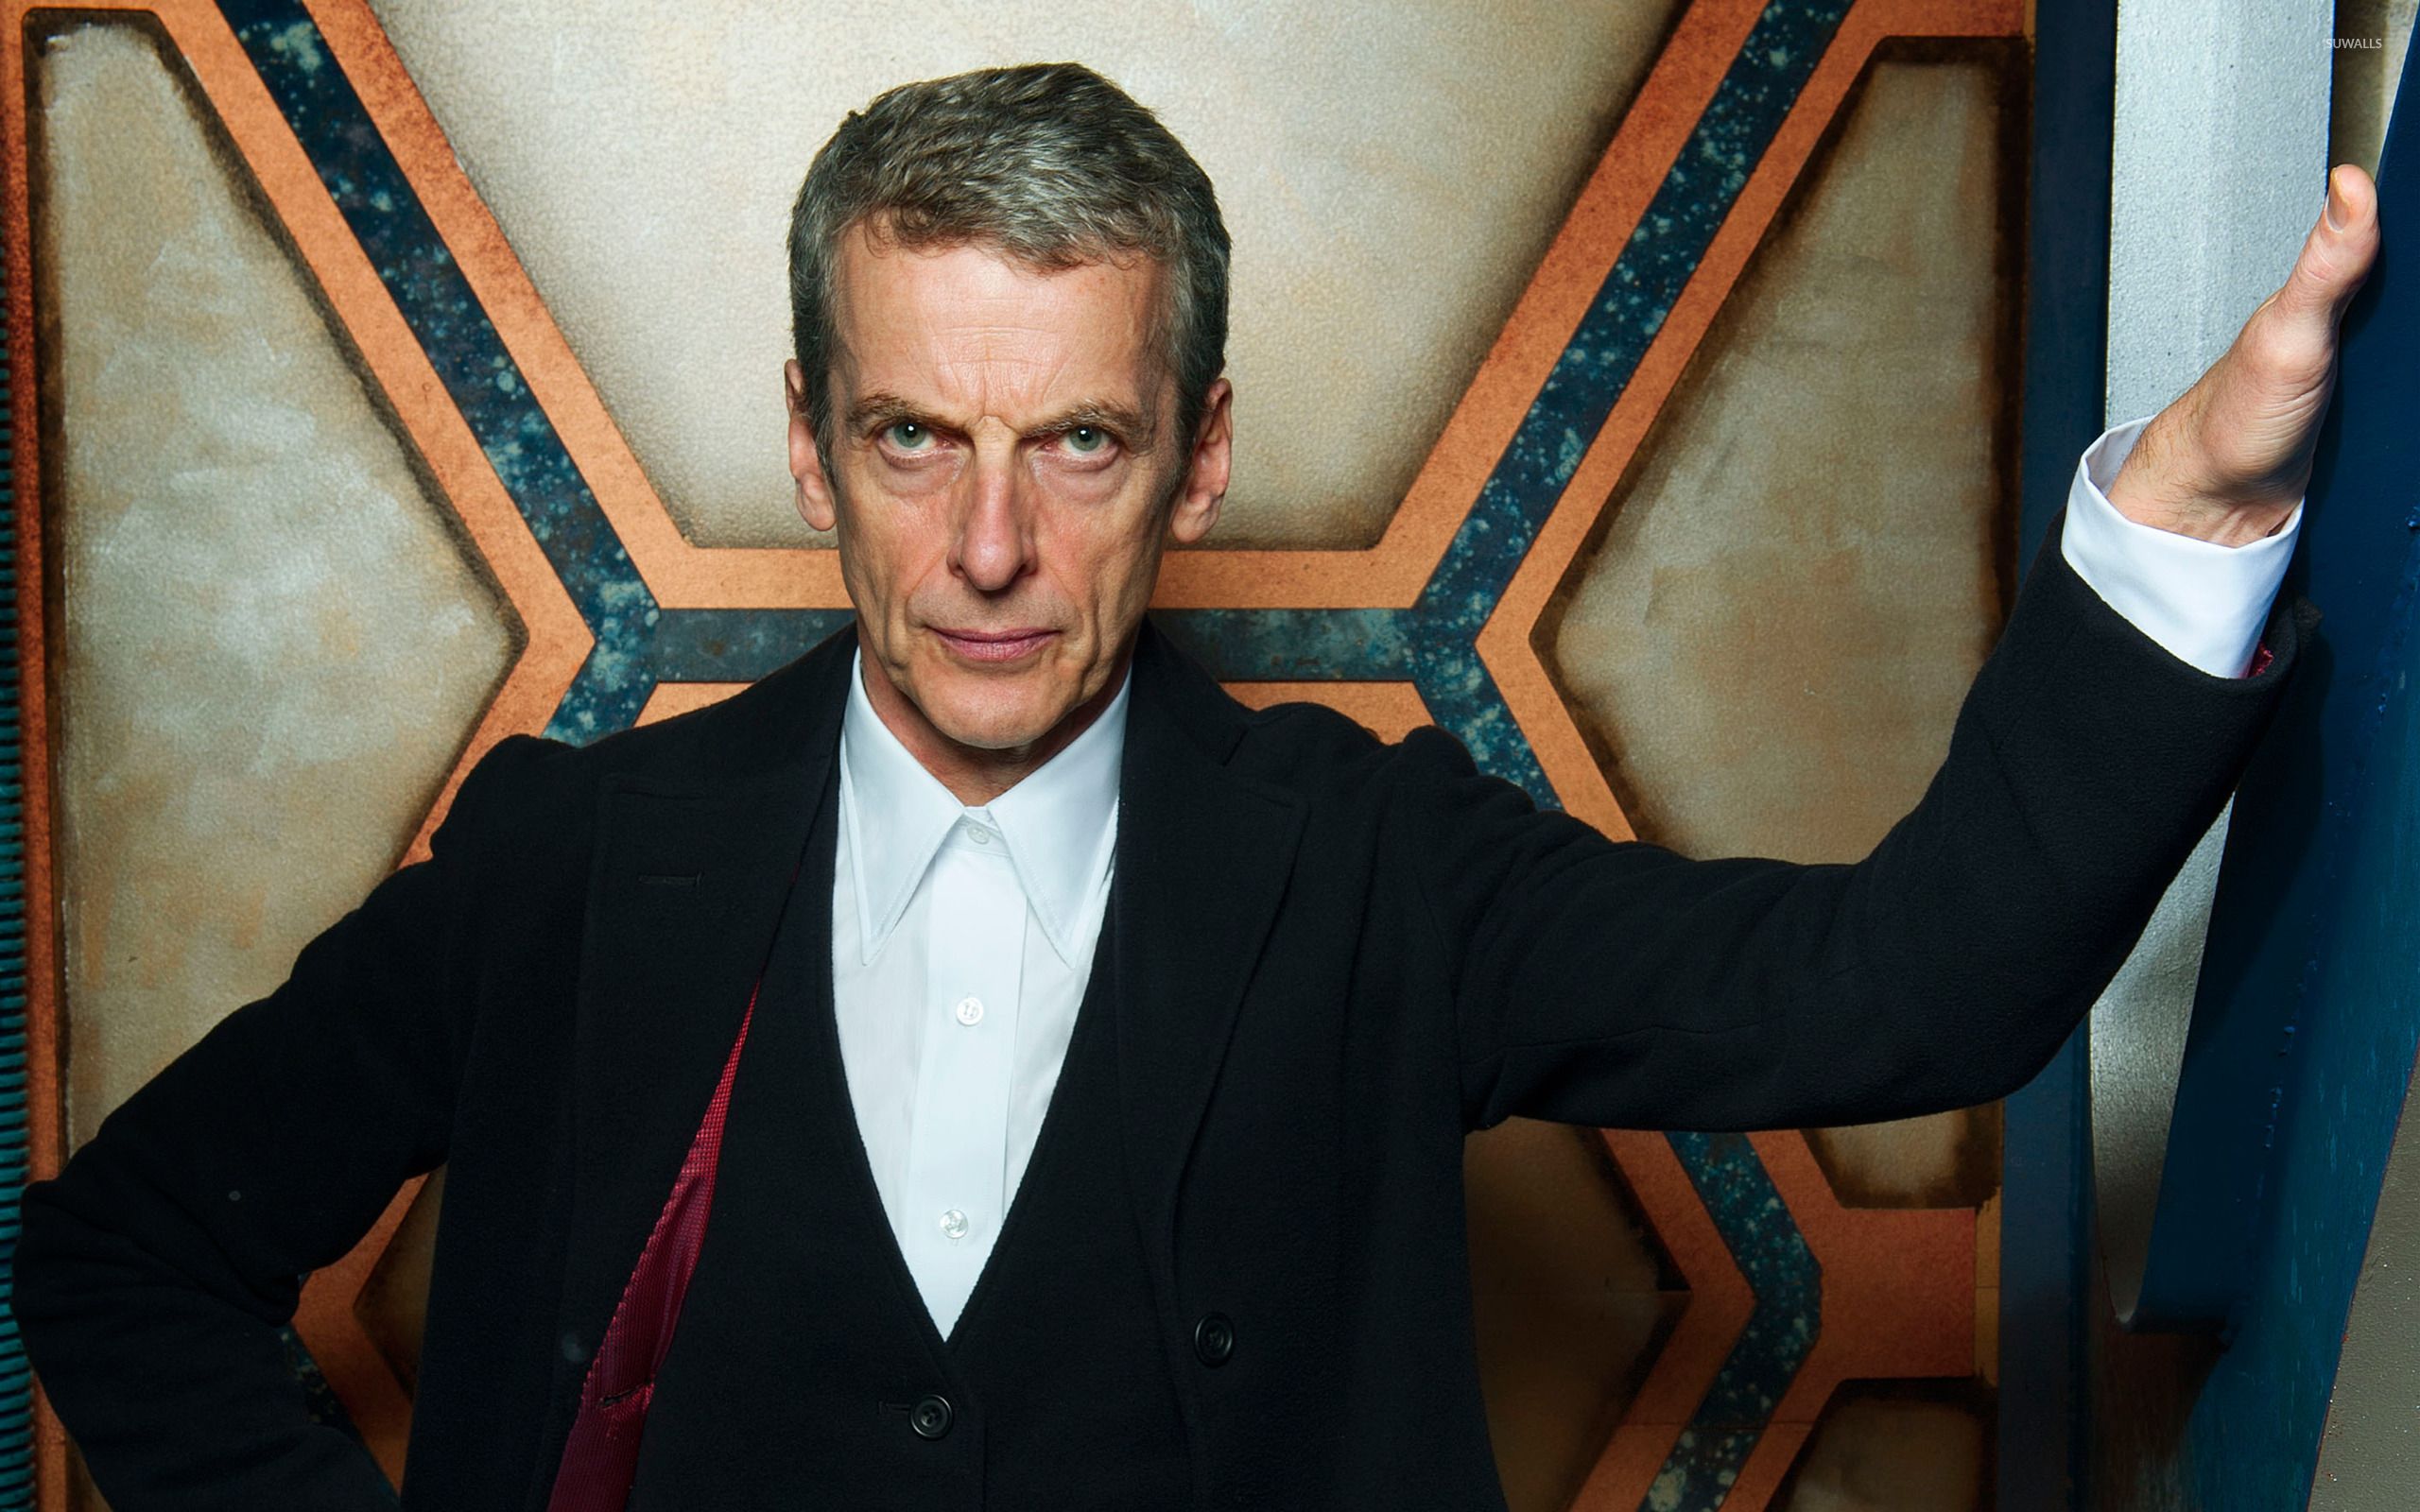 The 12th Doctor wallpaper Show wallpaper